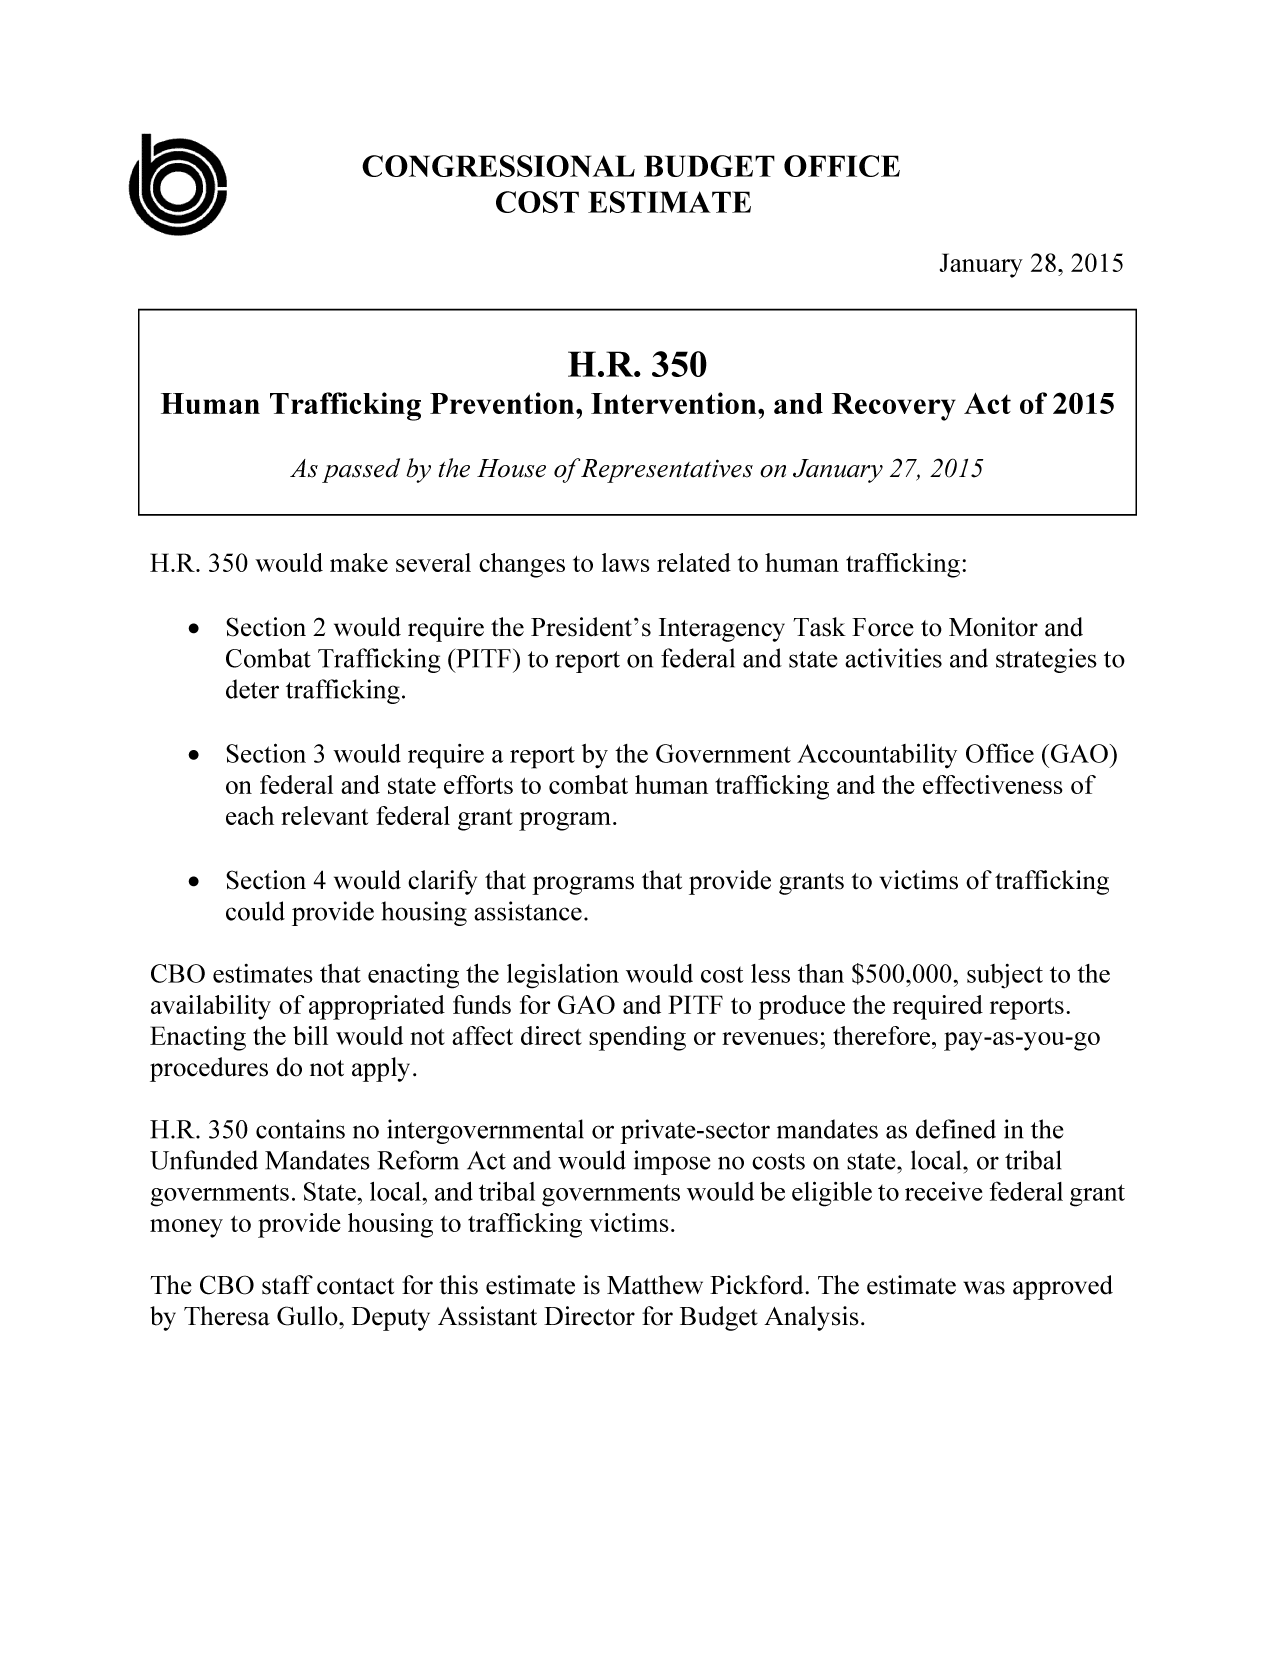 handle is hein.congrec/cbo2047 and id is 1 raw text is: CONGRESSIONAL BUDGET OFFICE
COST ESTIMATE

January 28, 2015

H.R. 350 would make several changes to laws related to human trafficking:
 Section 2 would require the President's Interagency Task Force to Monitor and
Combat Trafficking (PITF) to report on federal and state activities and strategies to
deter trafficking.
  Section 3 would require a report by the Government Accountability Office (GAO)
on federal and state efforts to combat human trafficking and the effectiveness of
each relevant federal grant program.
  Section 4 would clarify that programs that provide grants to victims of trafficking
could provide housing assistance.
CBO estimates that enacting the legislation would cost less than $500,000, subject to the
availability of appropriated funds for GAO and PITF to produce the required reports.
Enacting the bill would not affect direct spending or revenues; therefore, pay-as-you-go
procedures do not apply.
H.R. 350 contains no intergovernmental or private-sector mandates as defined in the
Unfunded Mandates Reform Act and would impose no costs on state, local, or tribal
governments. State, local, and tribal governments would be eligible to receive federal grant
money to provide housing to trafficking victims.
The CBO staff contact for this estimate is Matthew Pickford. The estimate was approved
by Theresa Gullo, Deputy Assistant Director for Budget Analysis.

H.R. 350
Human Trafficking Prevention, Intervention, and Recovery Act of 2015
As passed by the House of Representatives on January 27, 2015


